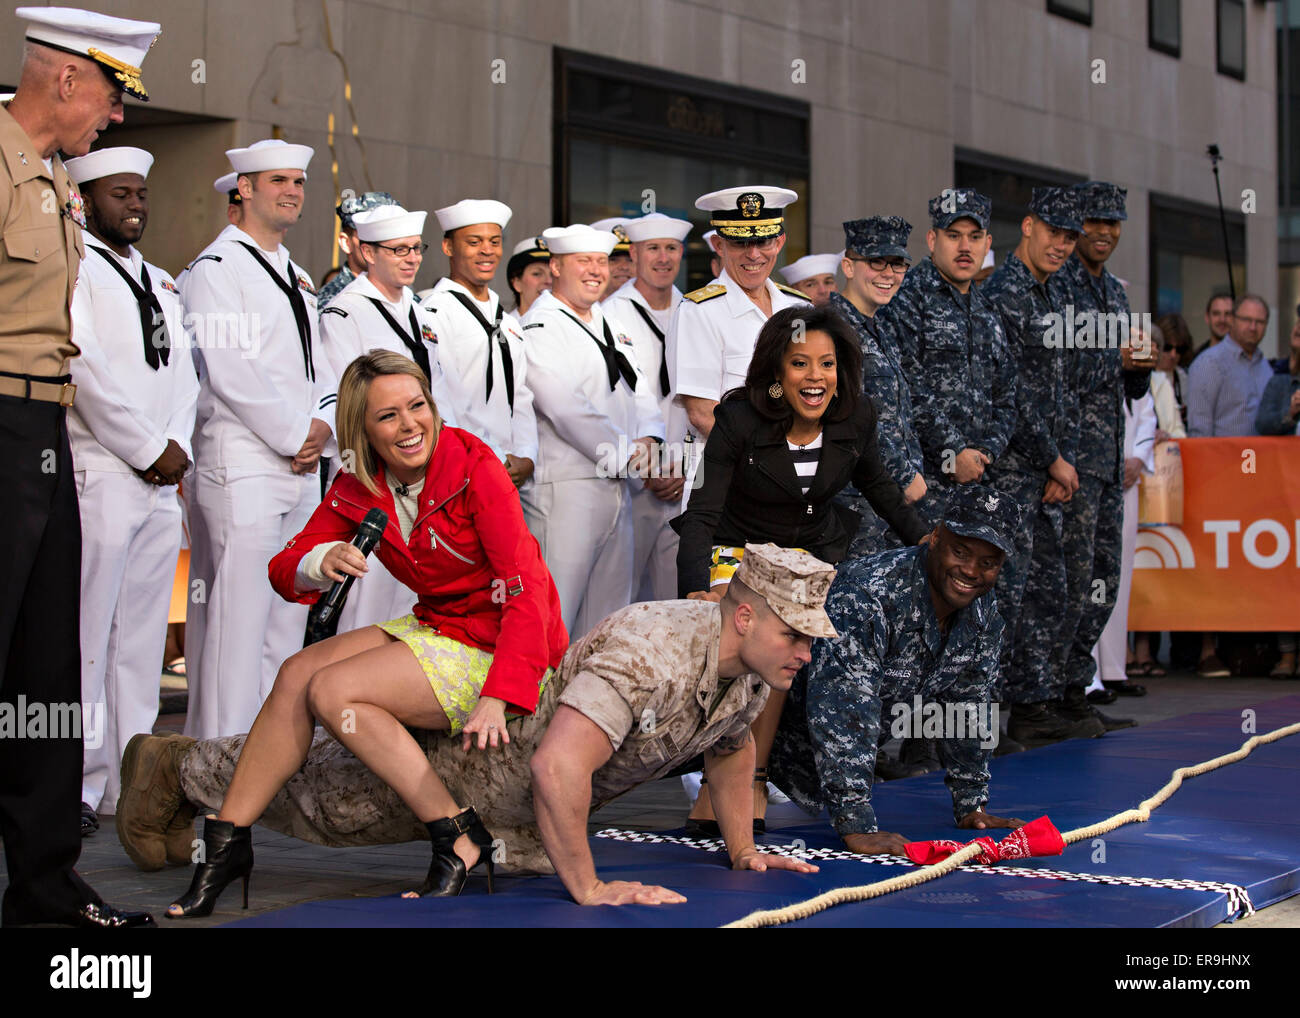 US Marines and sailors display their strength by performing push ups with NBC Today show hosts on their backs during the morning talk show as a part of Fleet Week May 23, 2015 in New York City, NY.  Marines showcase the capabilities of the Marine Corps both physically, mentally and technologically during Fleet Week New York. Stock Photo